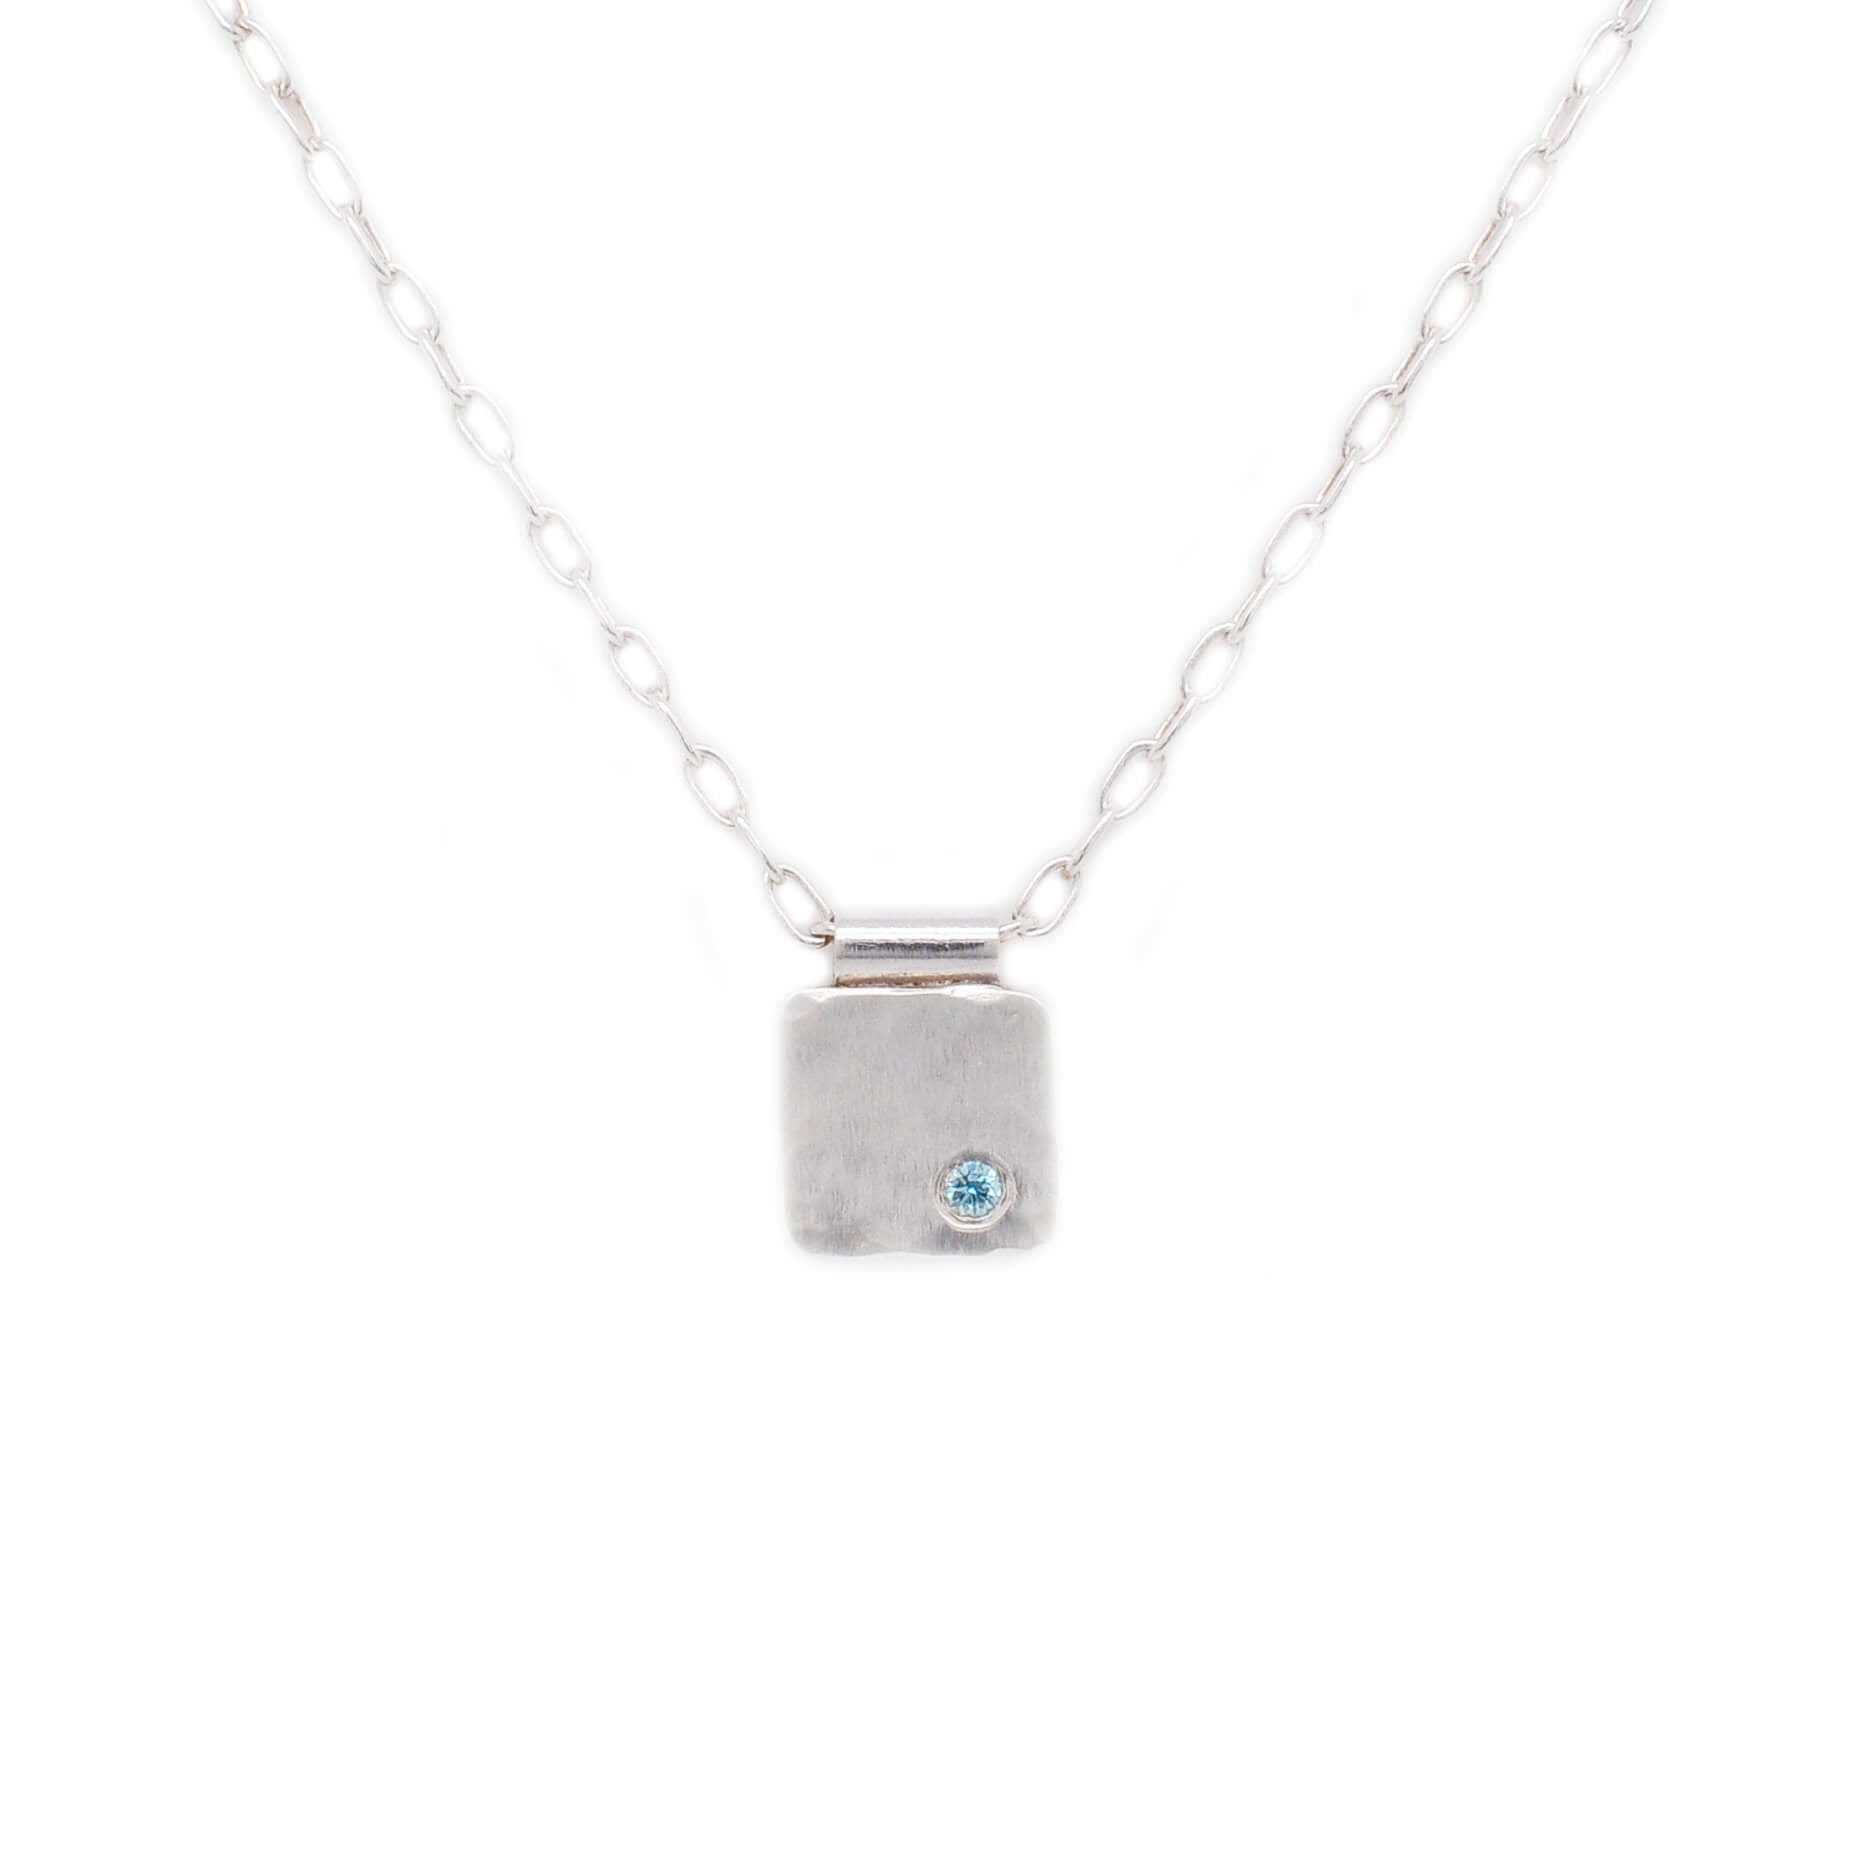 Pendant necklace with flush set teal blue diamond on a hammered silver cell.